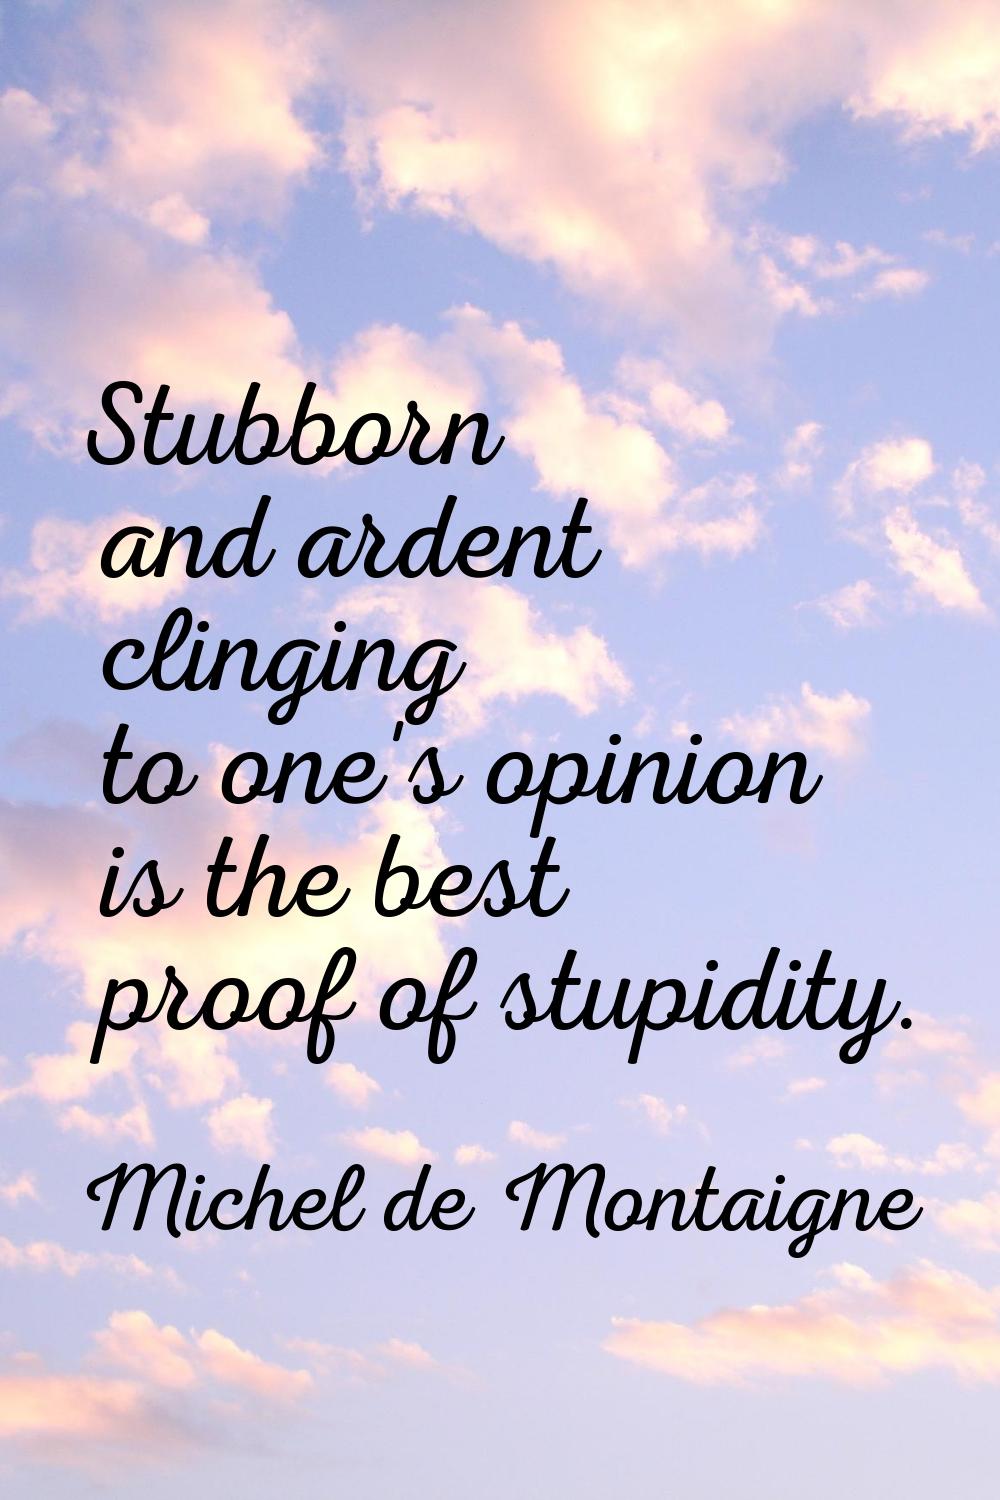 Stubborn and ardent clinging to one's opinion is the best proof of stupidity.